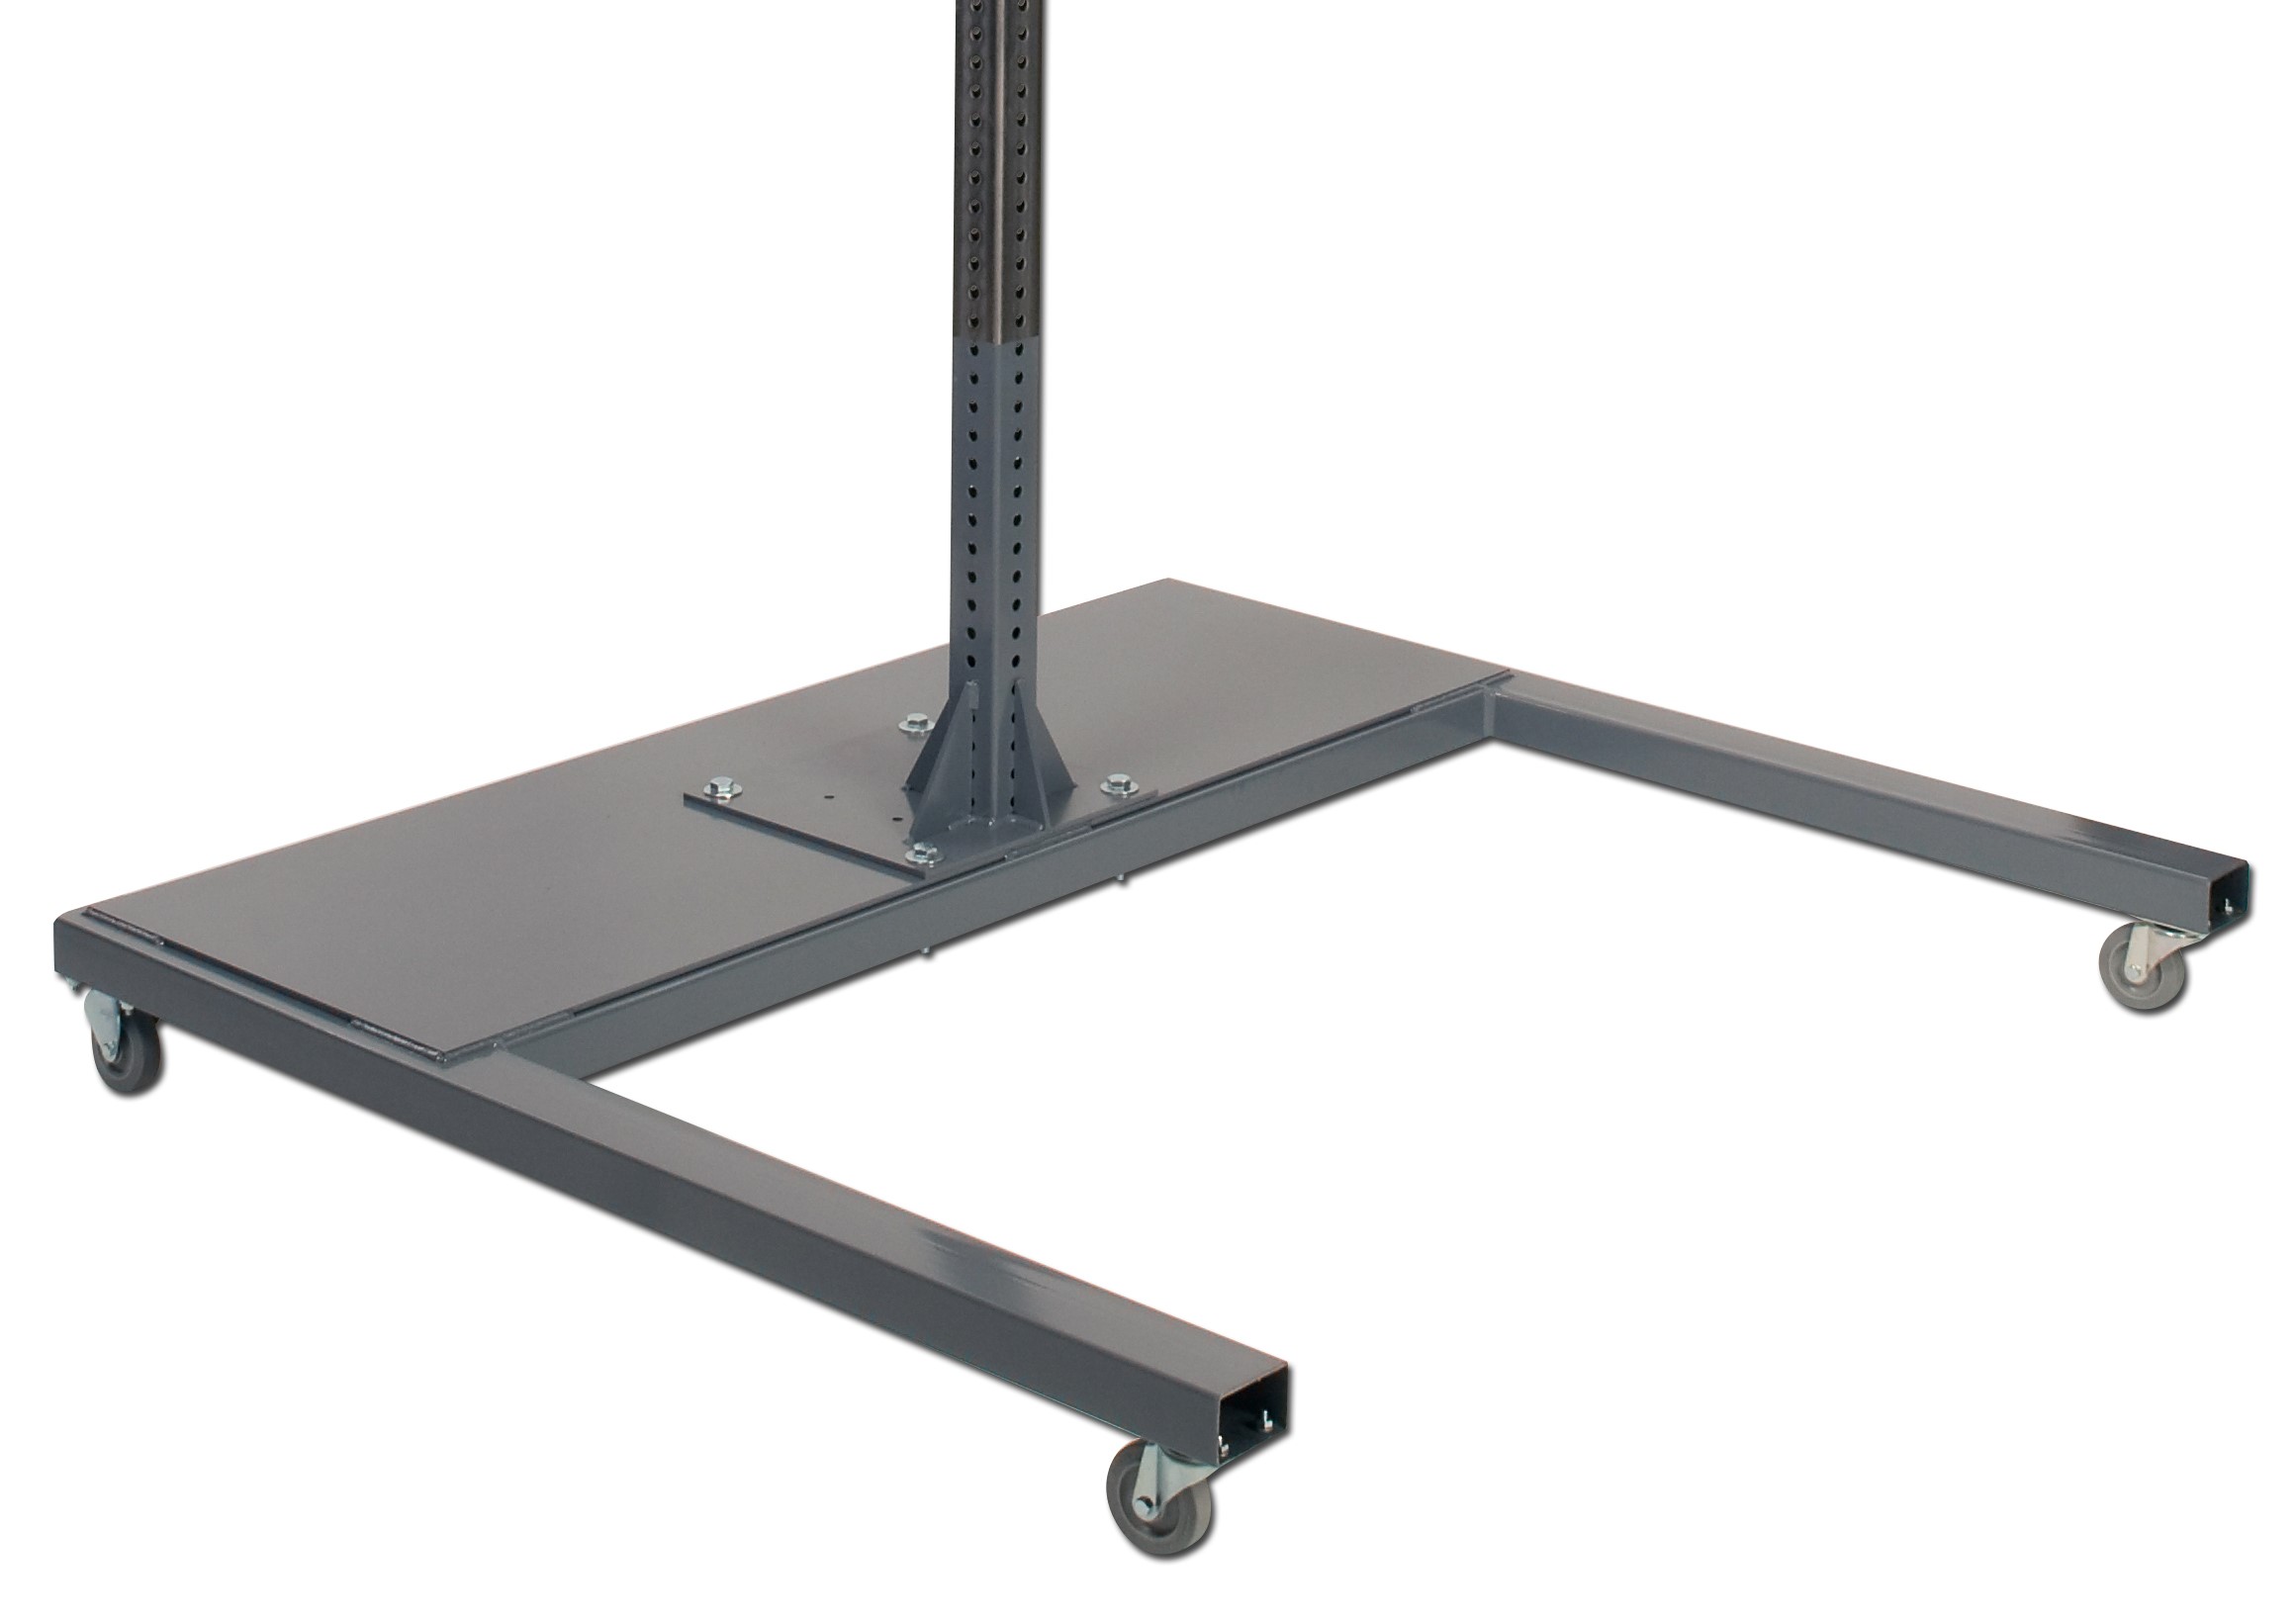 Manual Lift Style Mixer Mounting Stand with Casters for IBC Totes - image 2